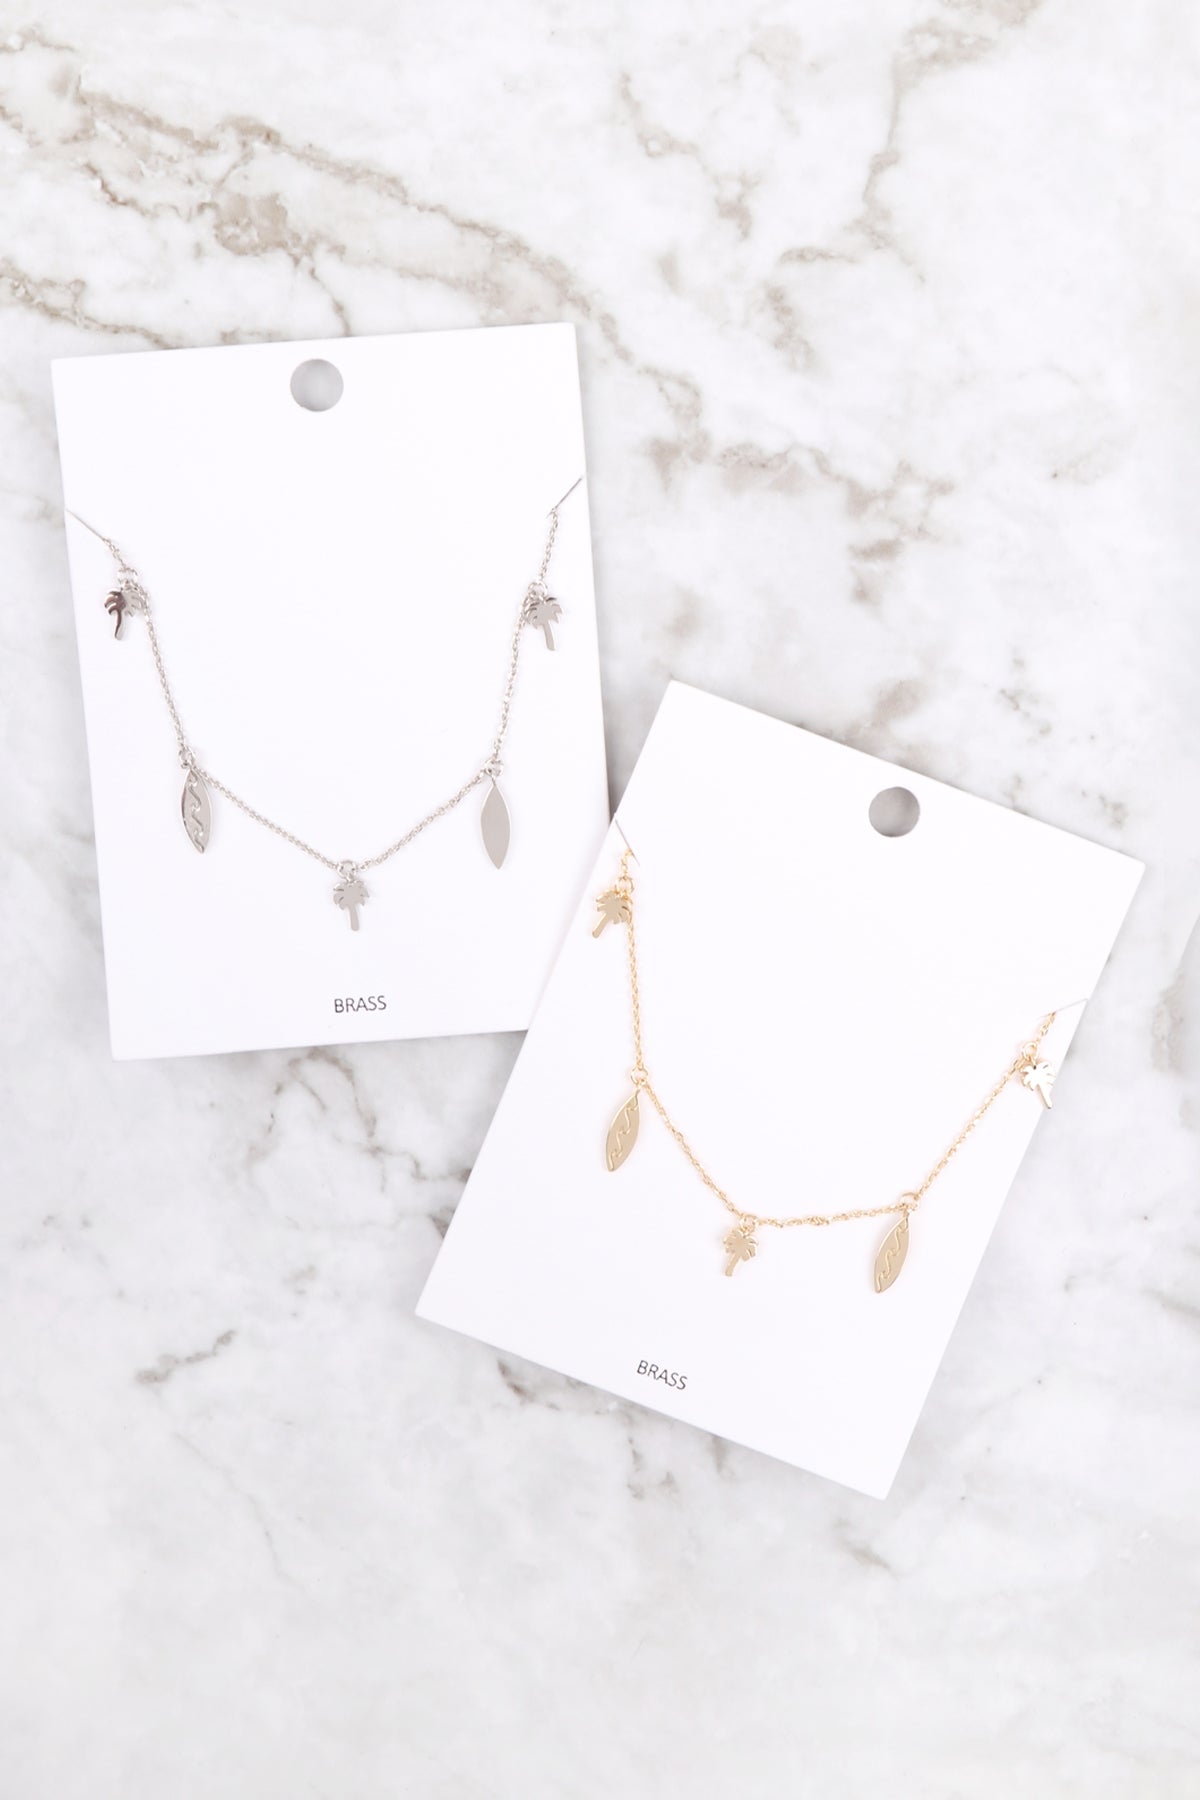 PALM TREE & SURF BOARD BRASS DAINTY NECKLACE/6PCS (NOW $2.00 ONLY!)